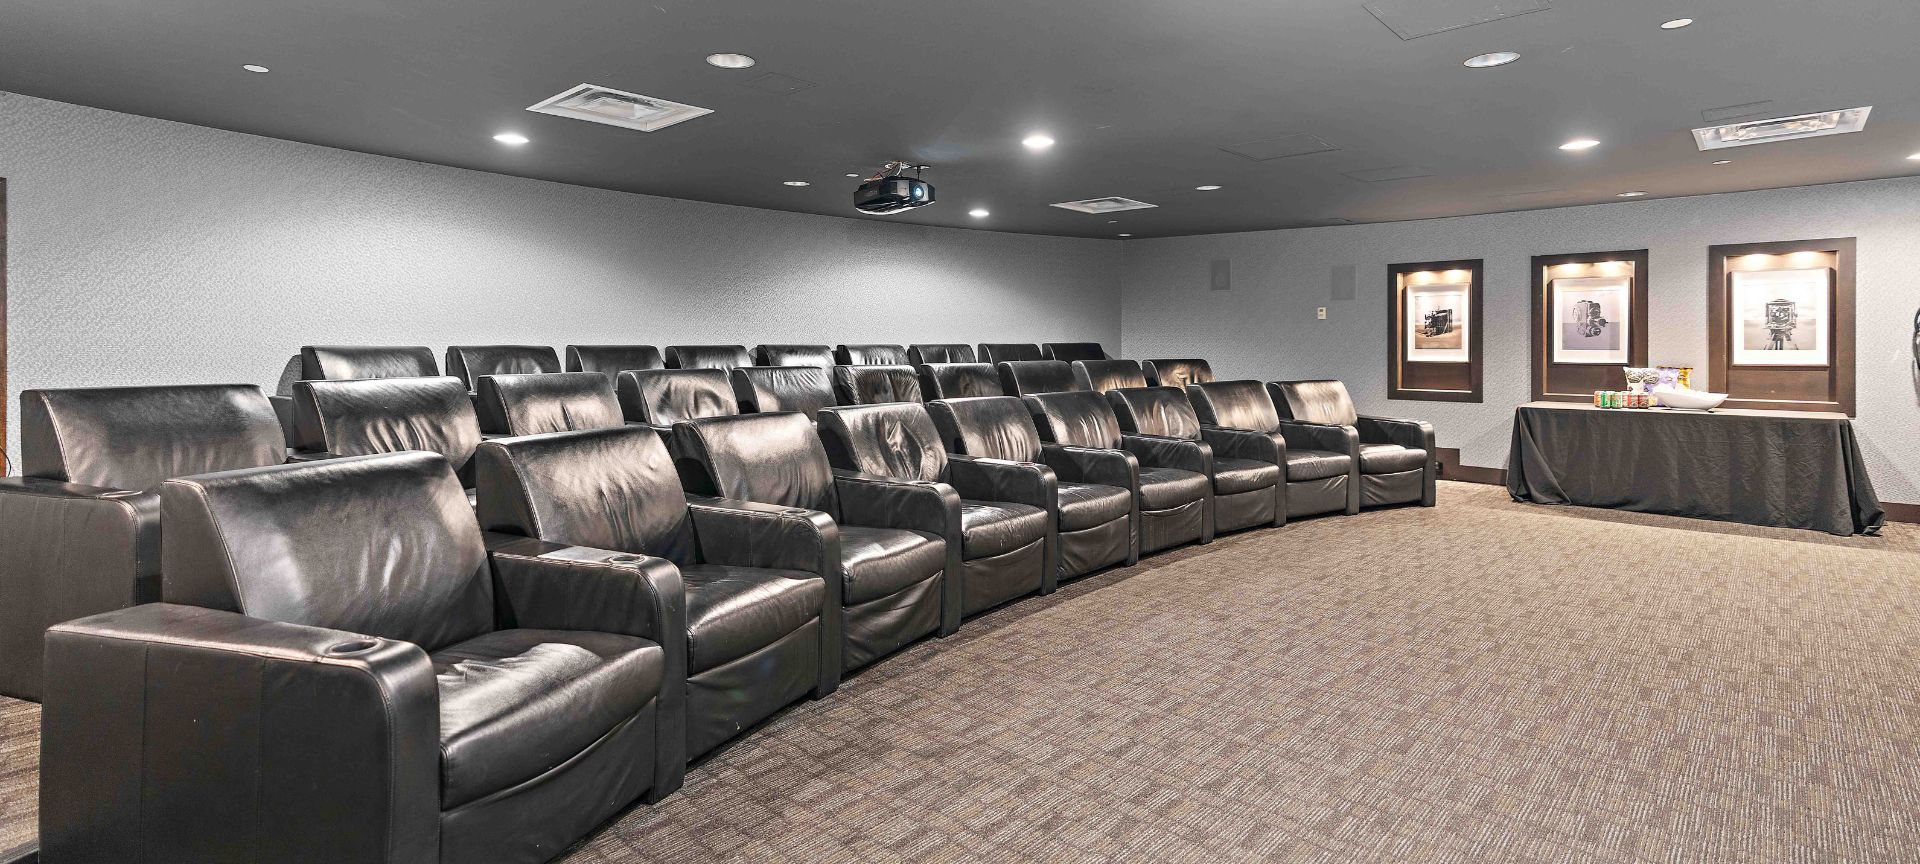 A Large Room With Black Leather Couches